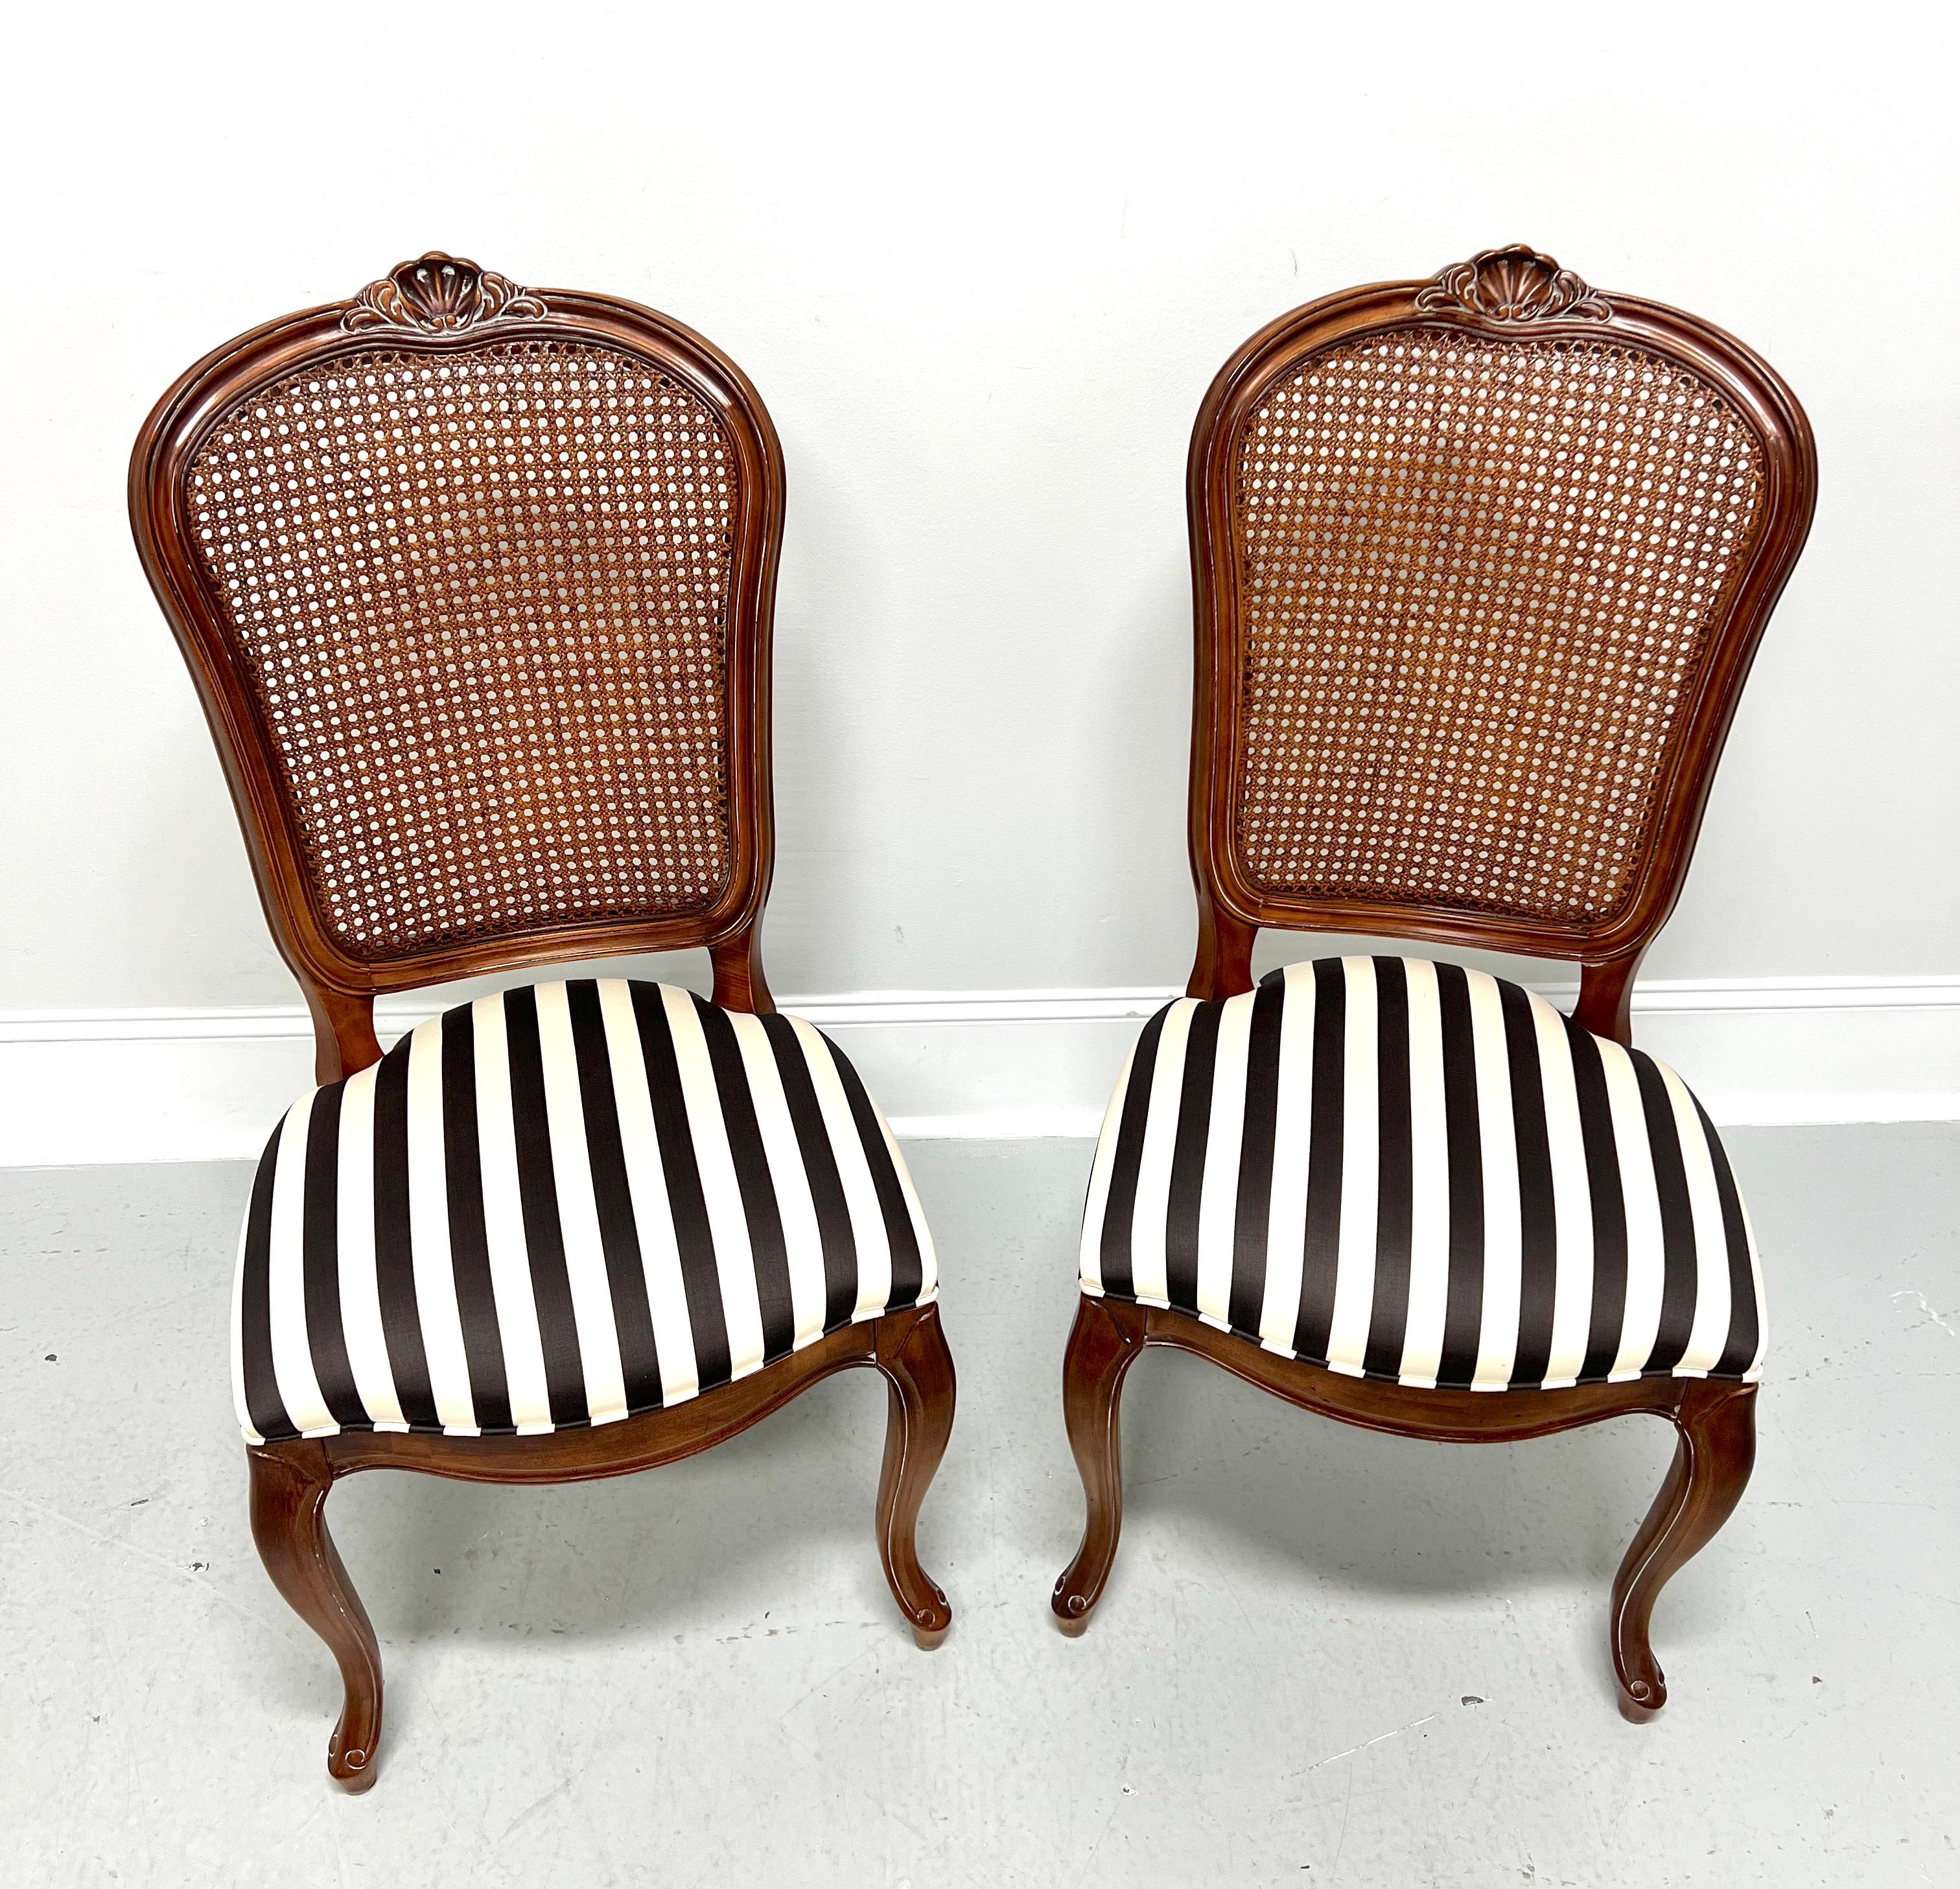 A pair of French Provincial style dining side chairs by Century Furniture, from their Chardeau Collection designed by Raymond K Sobota. Solid cherry wood, carved detail to crest rail, caning to backrest, black & white stripe pattern fabric